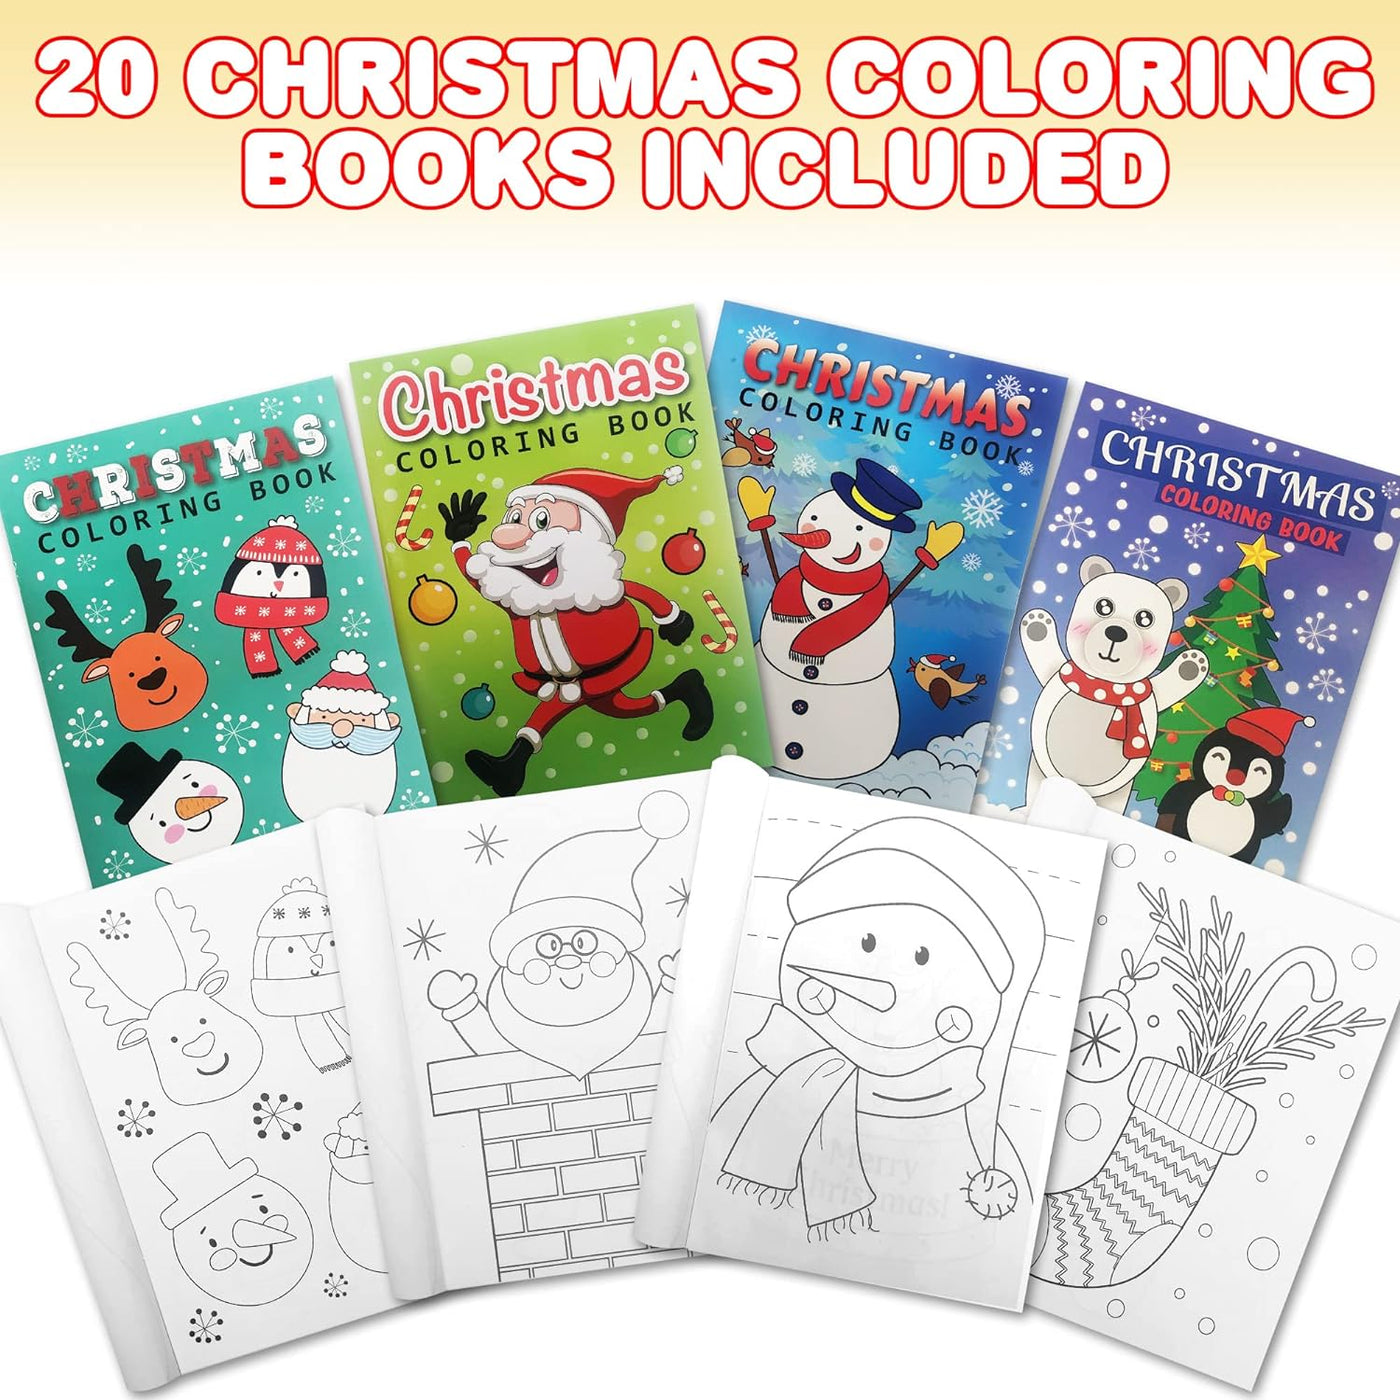 ArtCreativity Christmas Coloring Books for Kids Bulk, Pack of 20, 5” x 7” Holiday Christmas Coloring Book, Christmas Party Favors Activities for Kids,Christmas Goodie Bag Stocking Stuffers for Kids